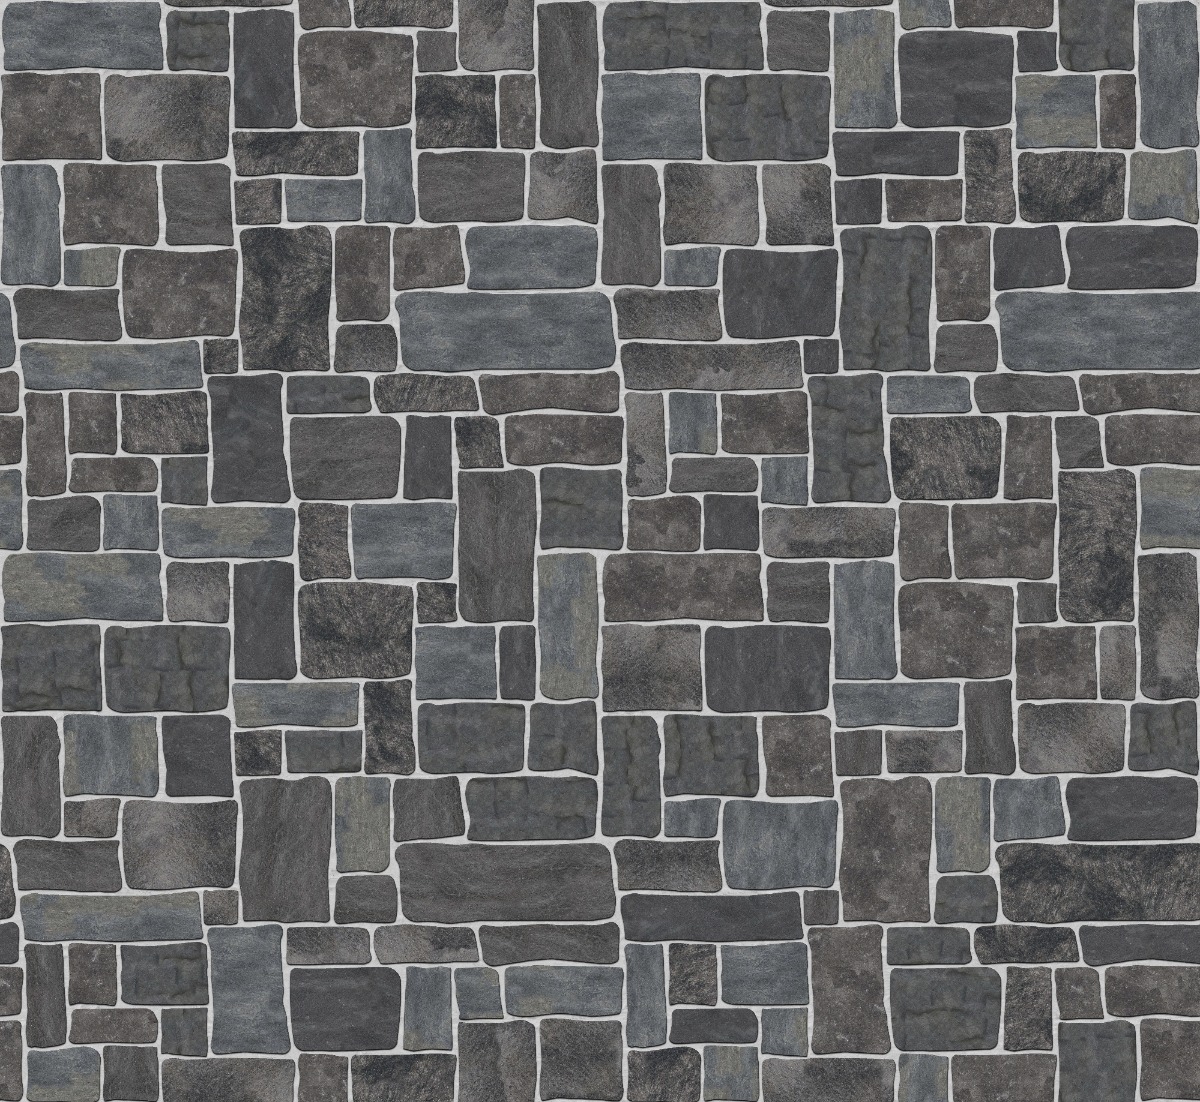 A seamless stone texture with granite - raven hill - split-face seam face surface - m749 blocks arranged in a Rough-Edge Squares & Rectangles - DP082 pattern